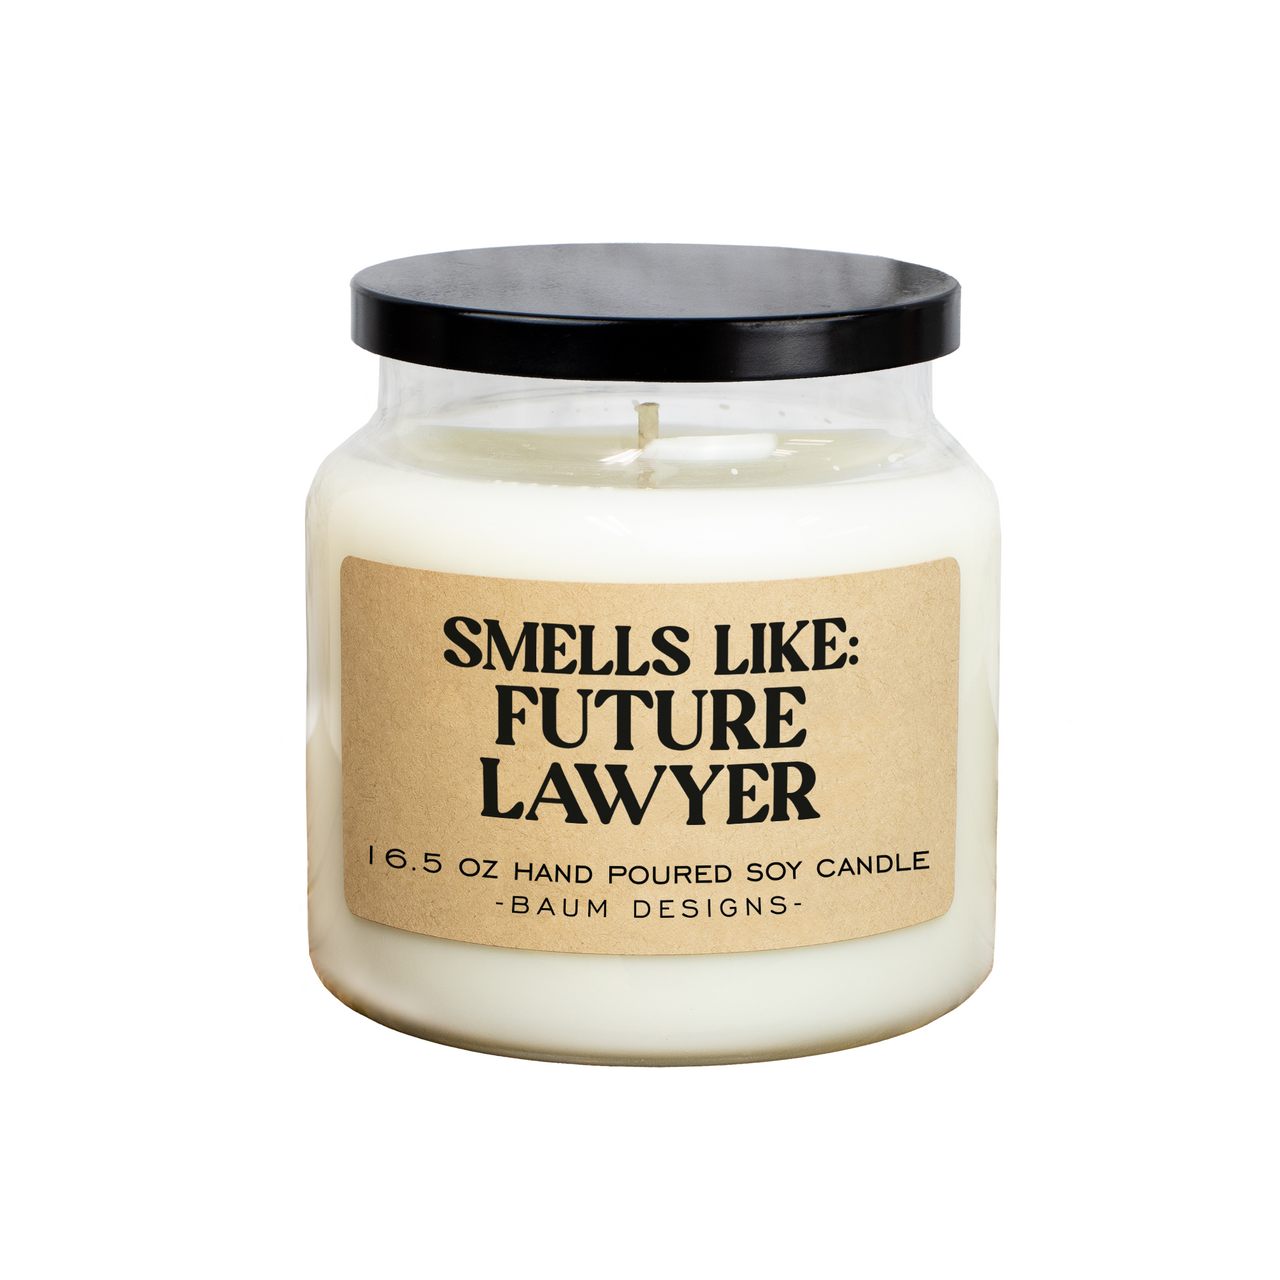 Smells Like Future Lawyer Soy Candle